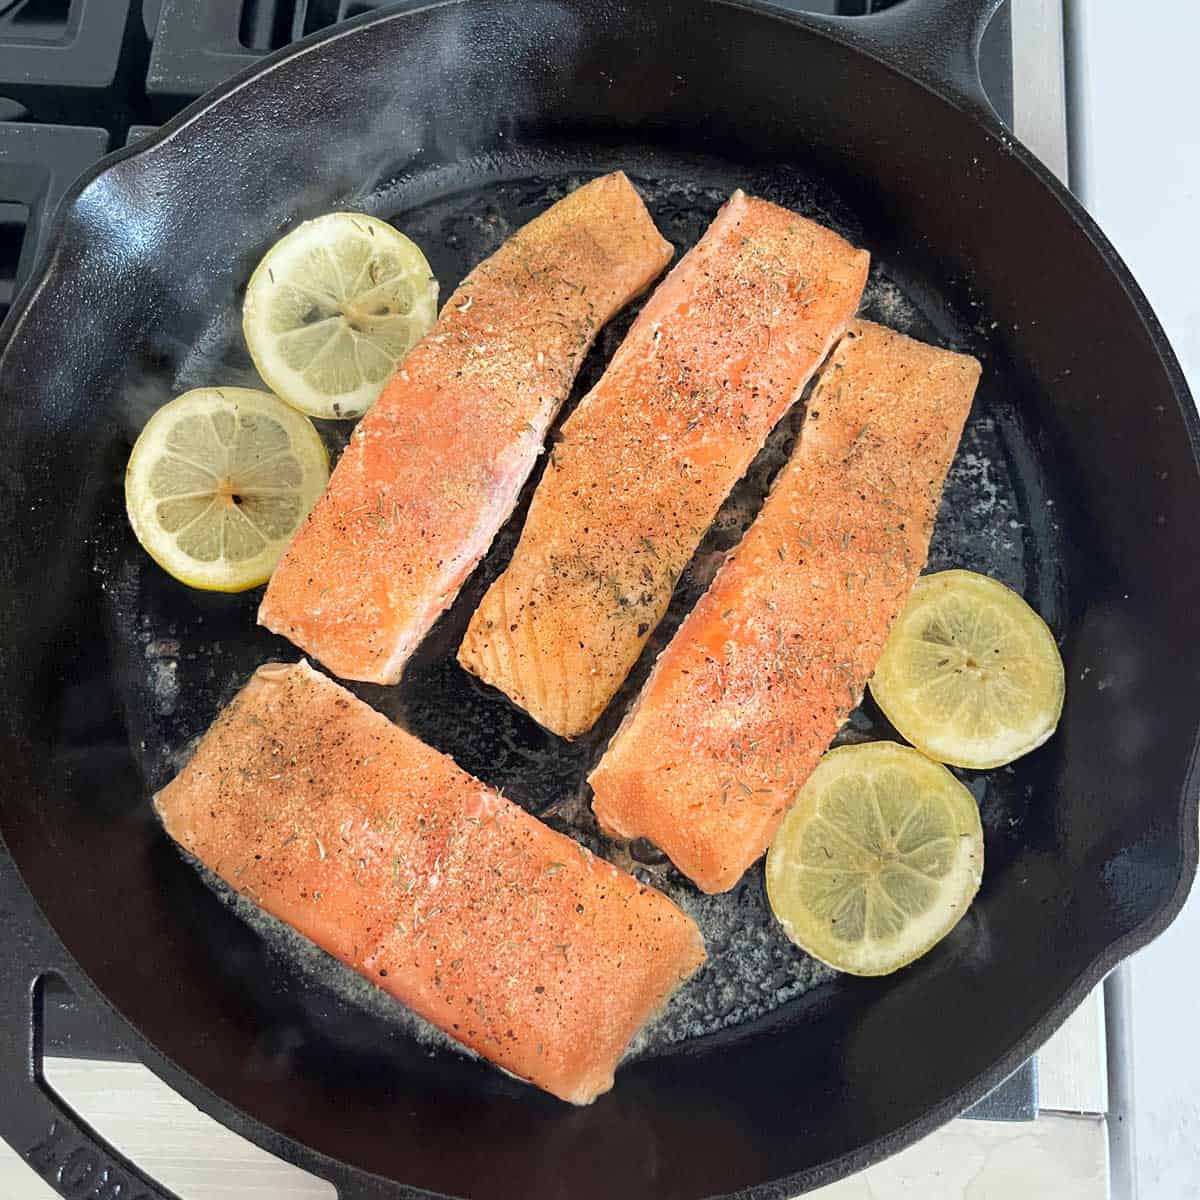 Four salmon fillets and four lemon slices are seared in a cast-iron skillet.